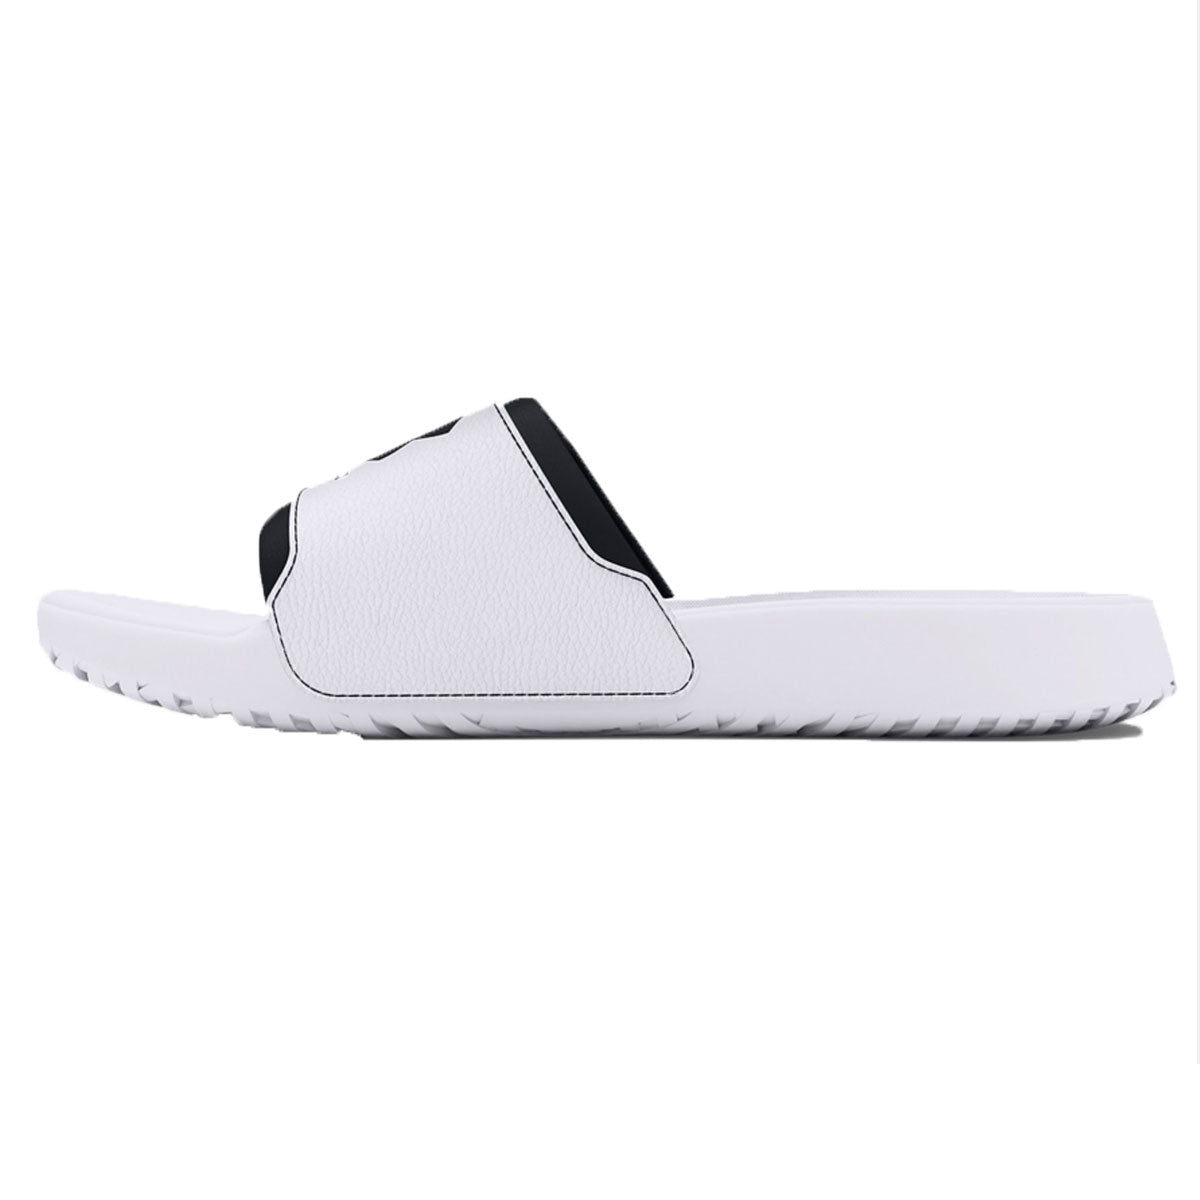 Under Armour Ignite Select Sliders - Adult - White/Black